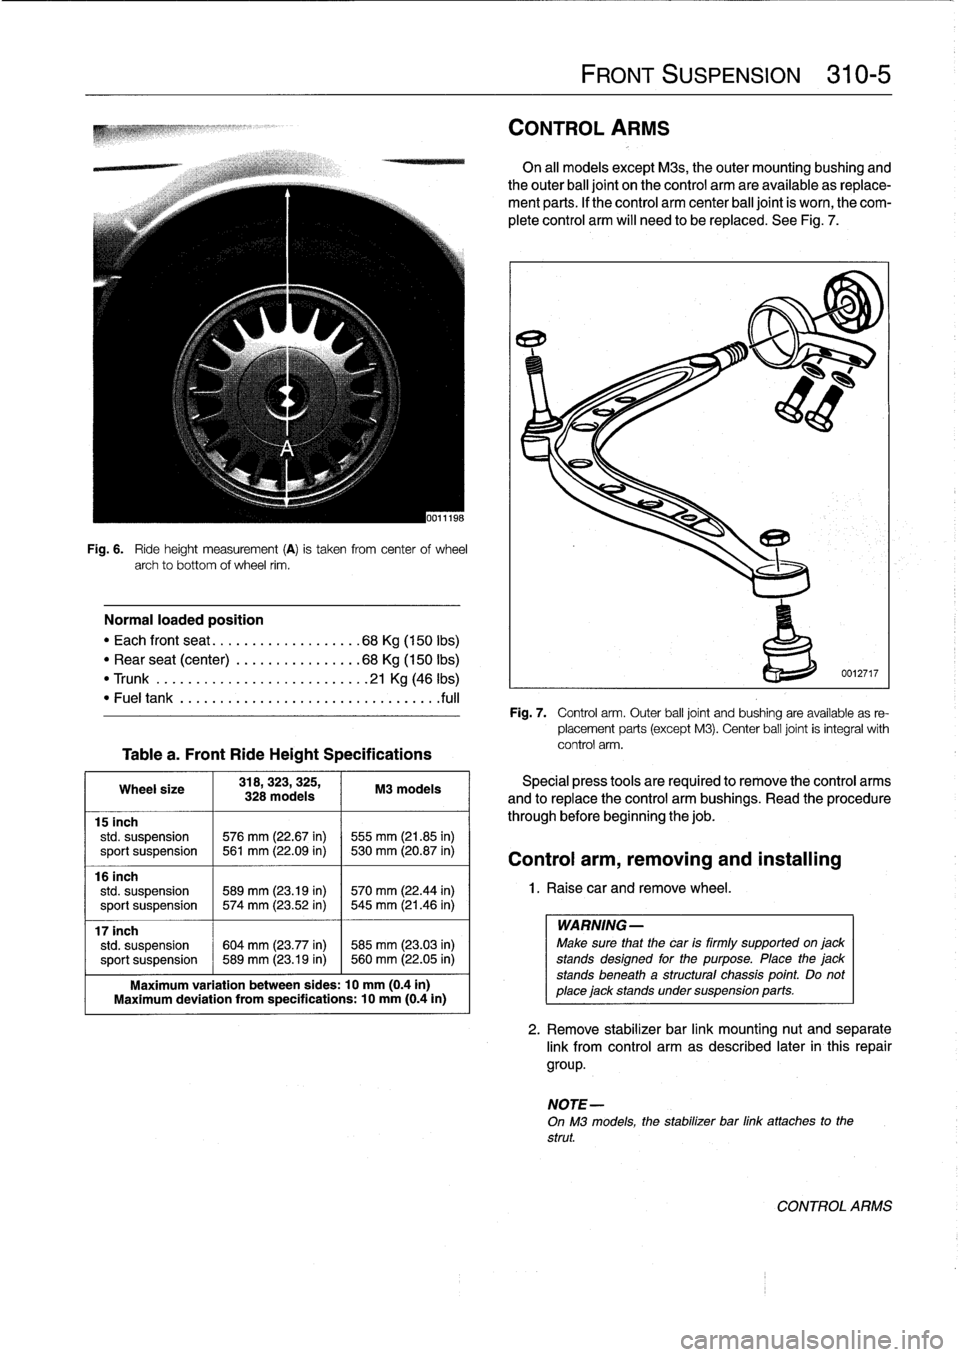 BMW 328i 1995 E36 Workshop Manual 
Fig
.
6
.

	

Ride
height
measurement
(A)
is
taken
from
centerof
wheel
archto
bottom
of
wheel
rim
.

Normal
loaded
position

"
Each
front
seat
...
...
.
..
..........
68Kg
(150
Ibs)

"
Rear
seat
(cen